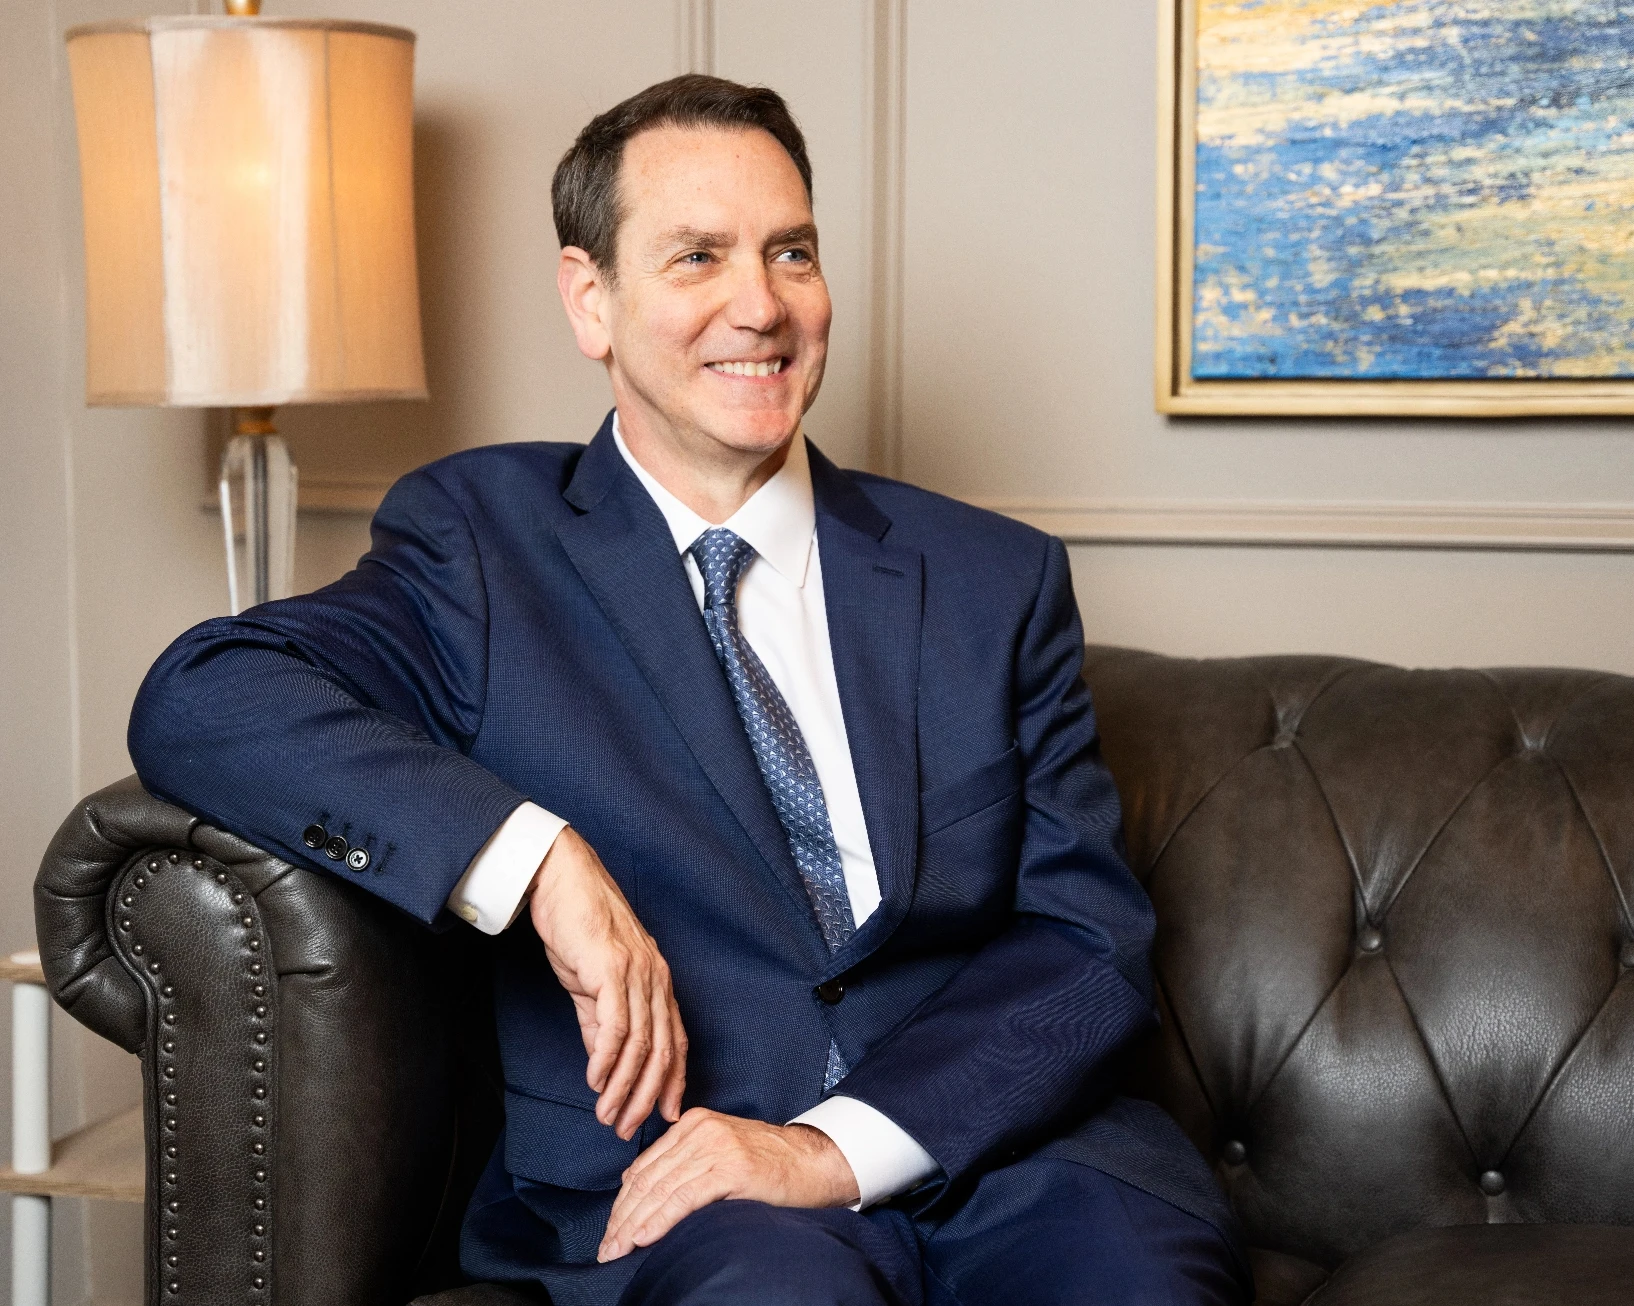 dr ingram smiling and sitting on a leather couch | Ingram Cosmetic Surgery Nashville